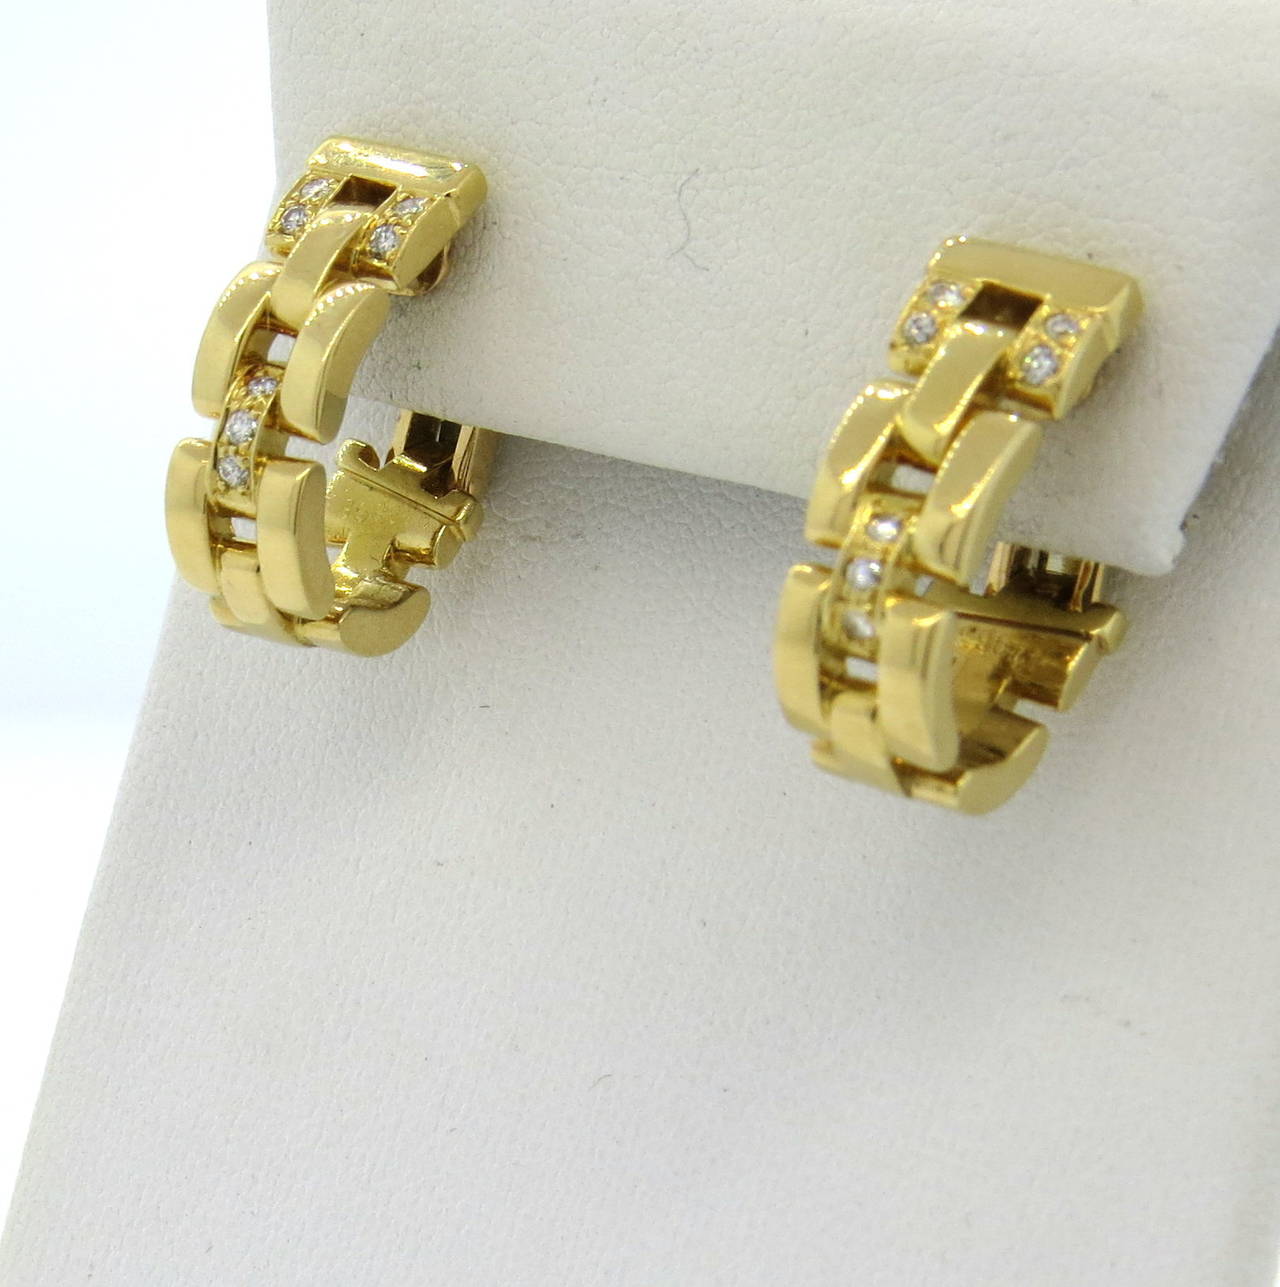 Women's Classic Cartier Panthere Maillon Diamond Gold Earrings